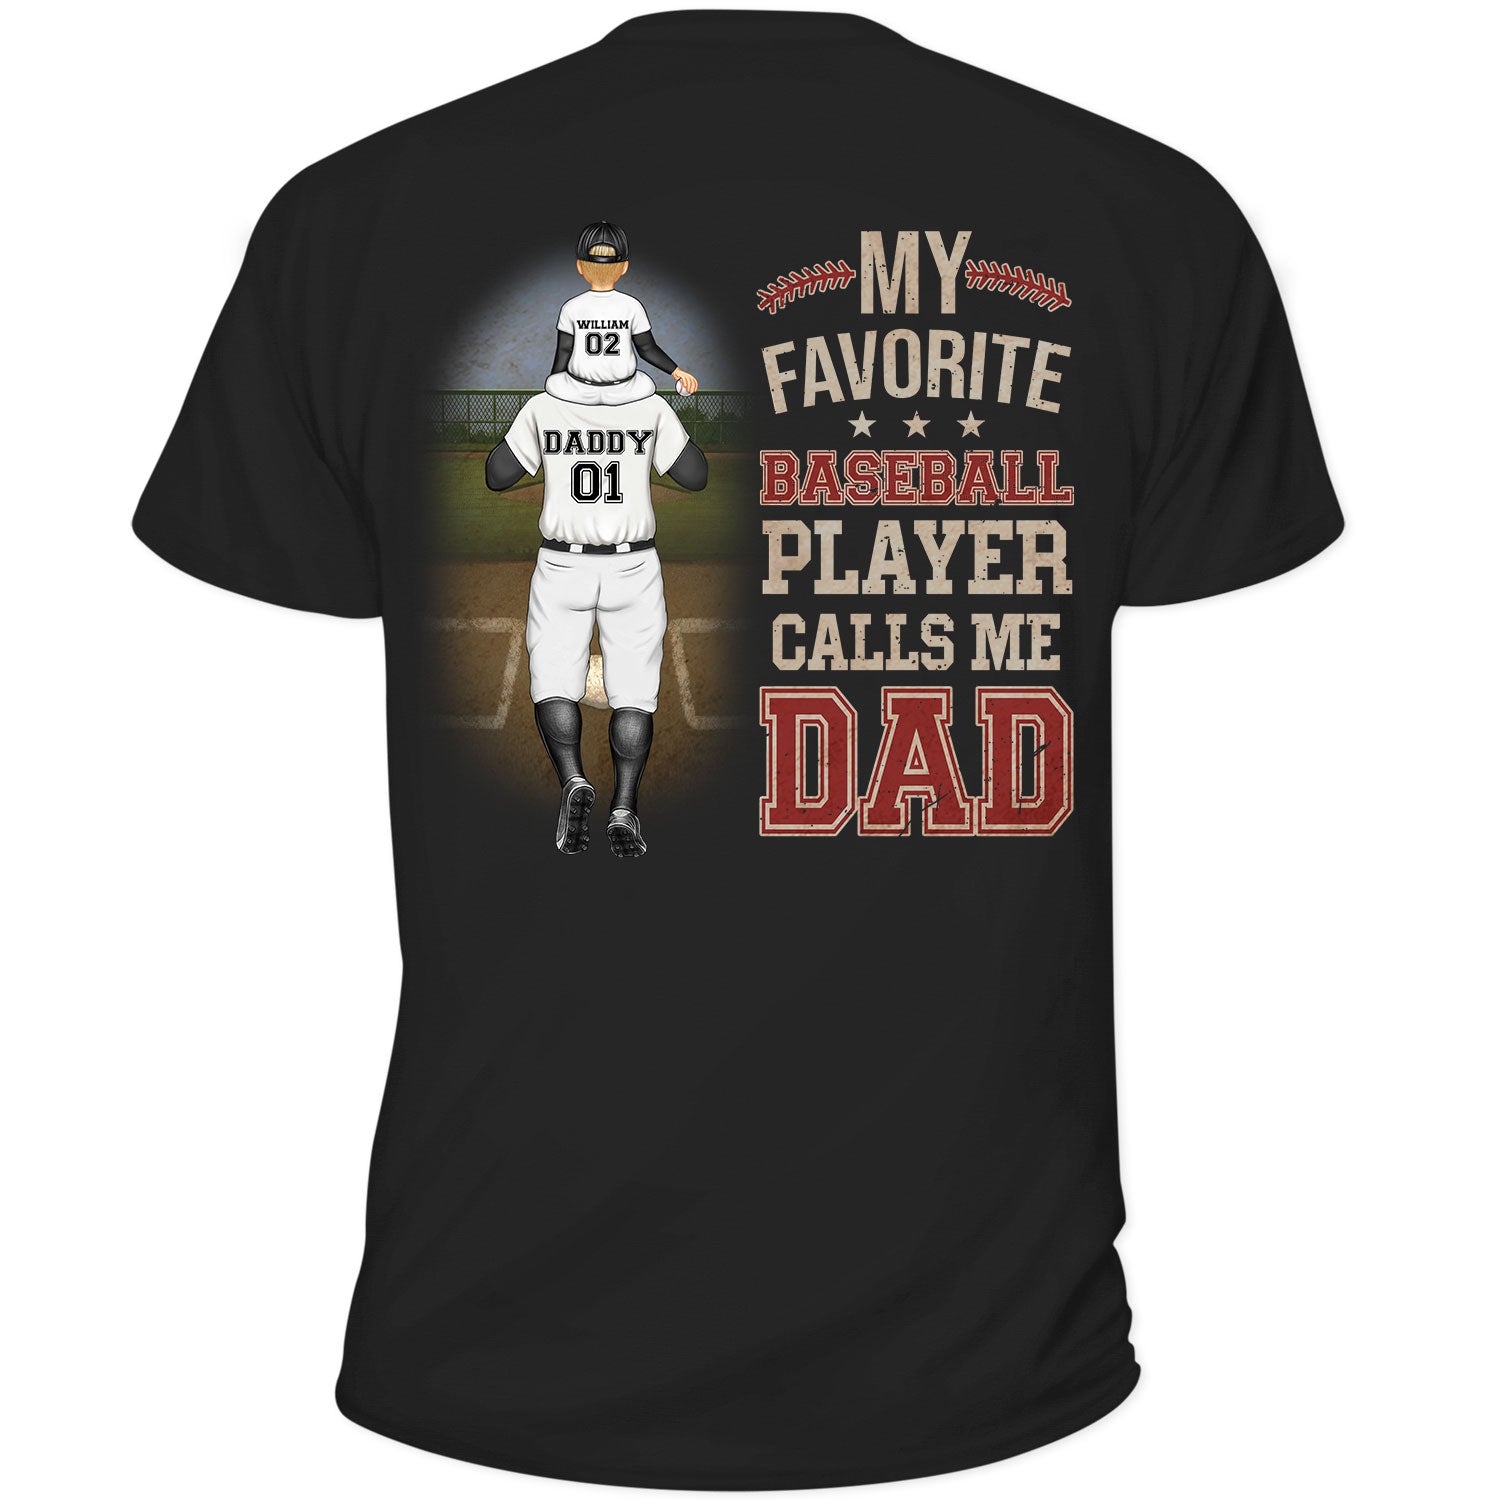 My Favorite Baseball Player Calls Me Dad - Gift For Father, Sport Fans - Personalized T Shirt